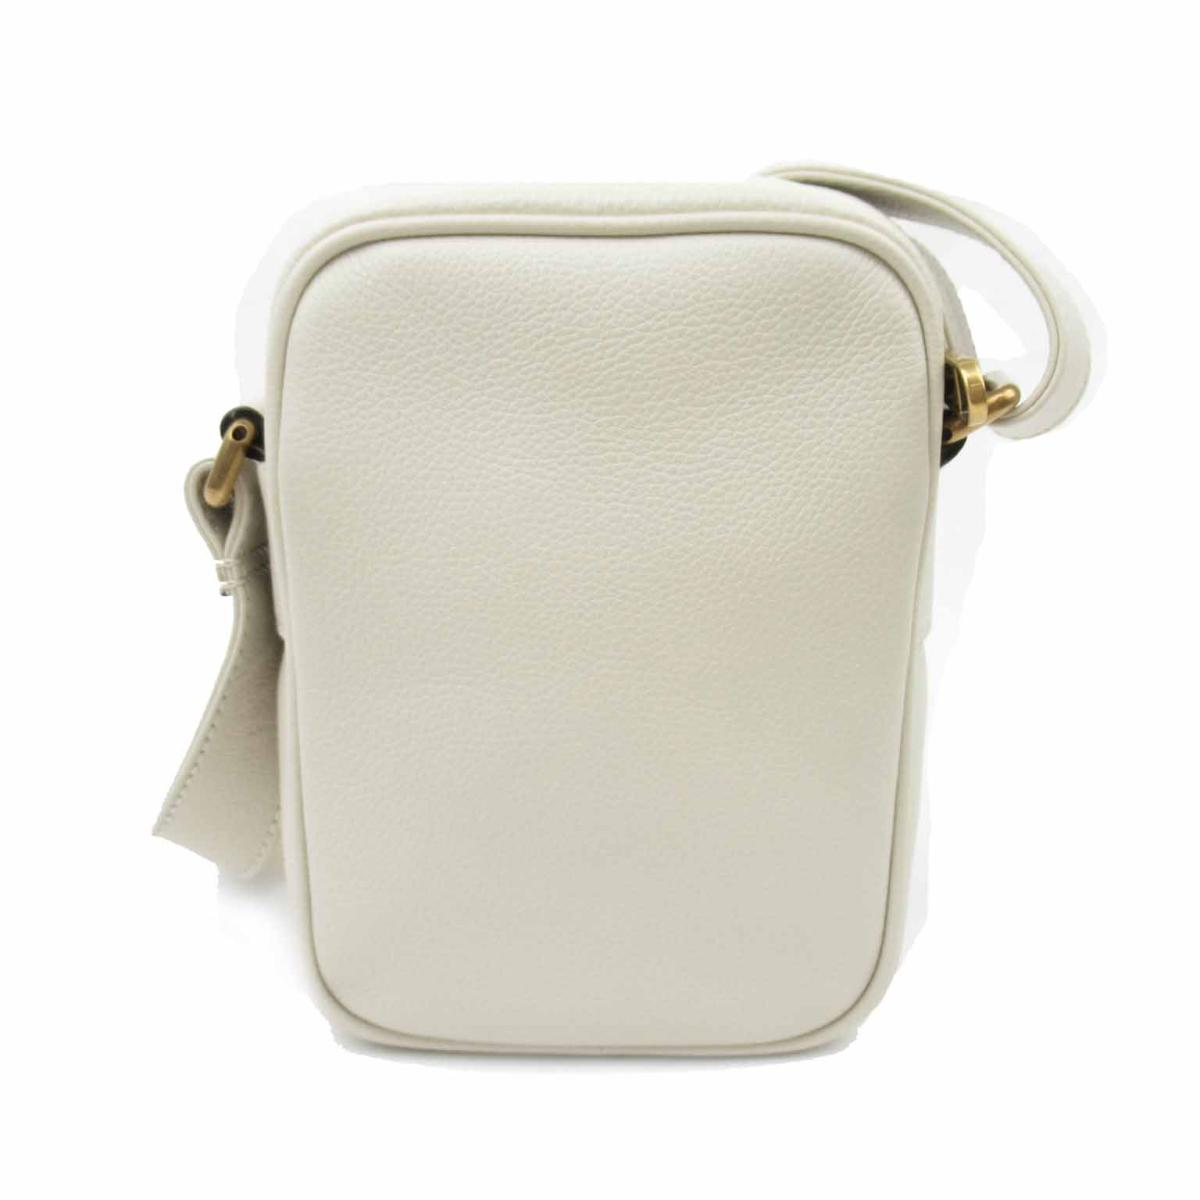 Broadway leather crossbody bag Gucci White in Leather - 16564590